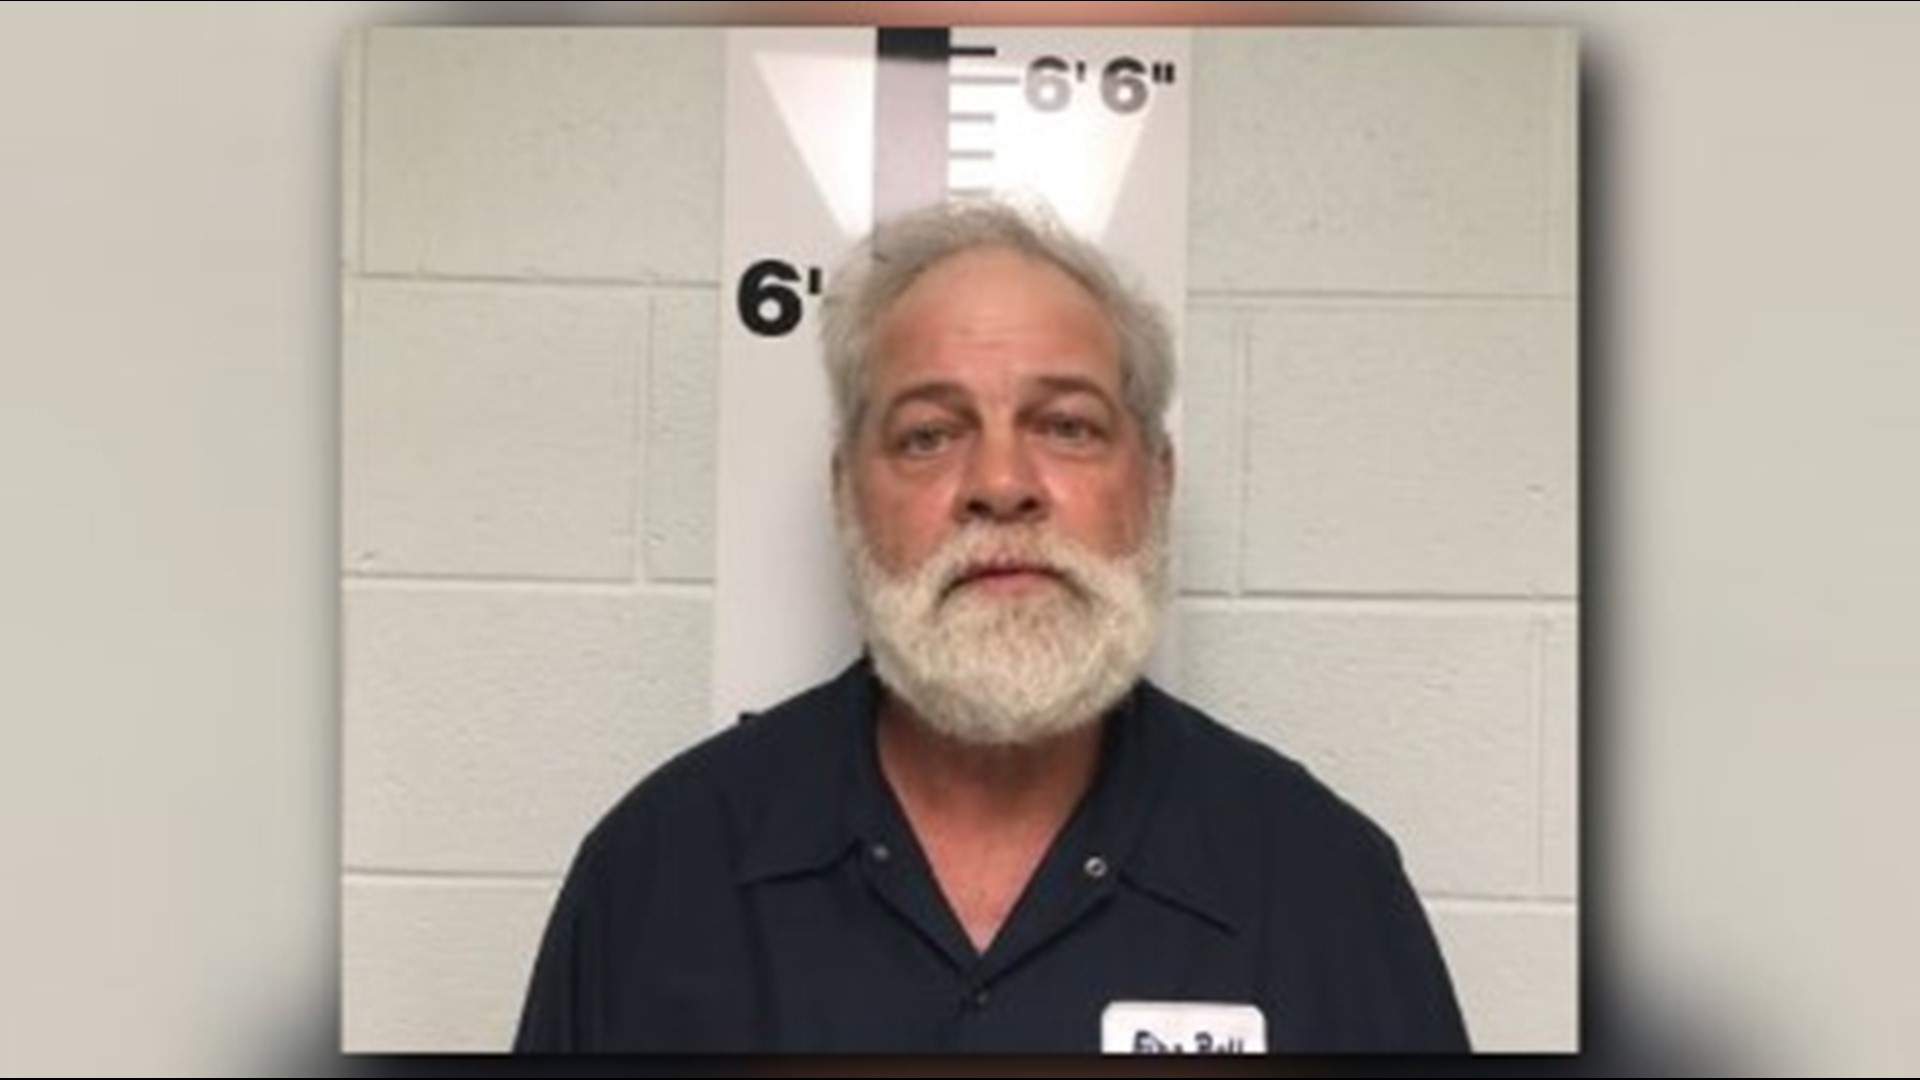 TBI arrests Claiborne County Sheriff David Ray and two employees